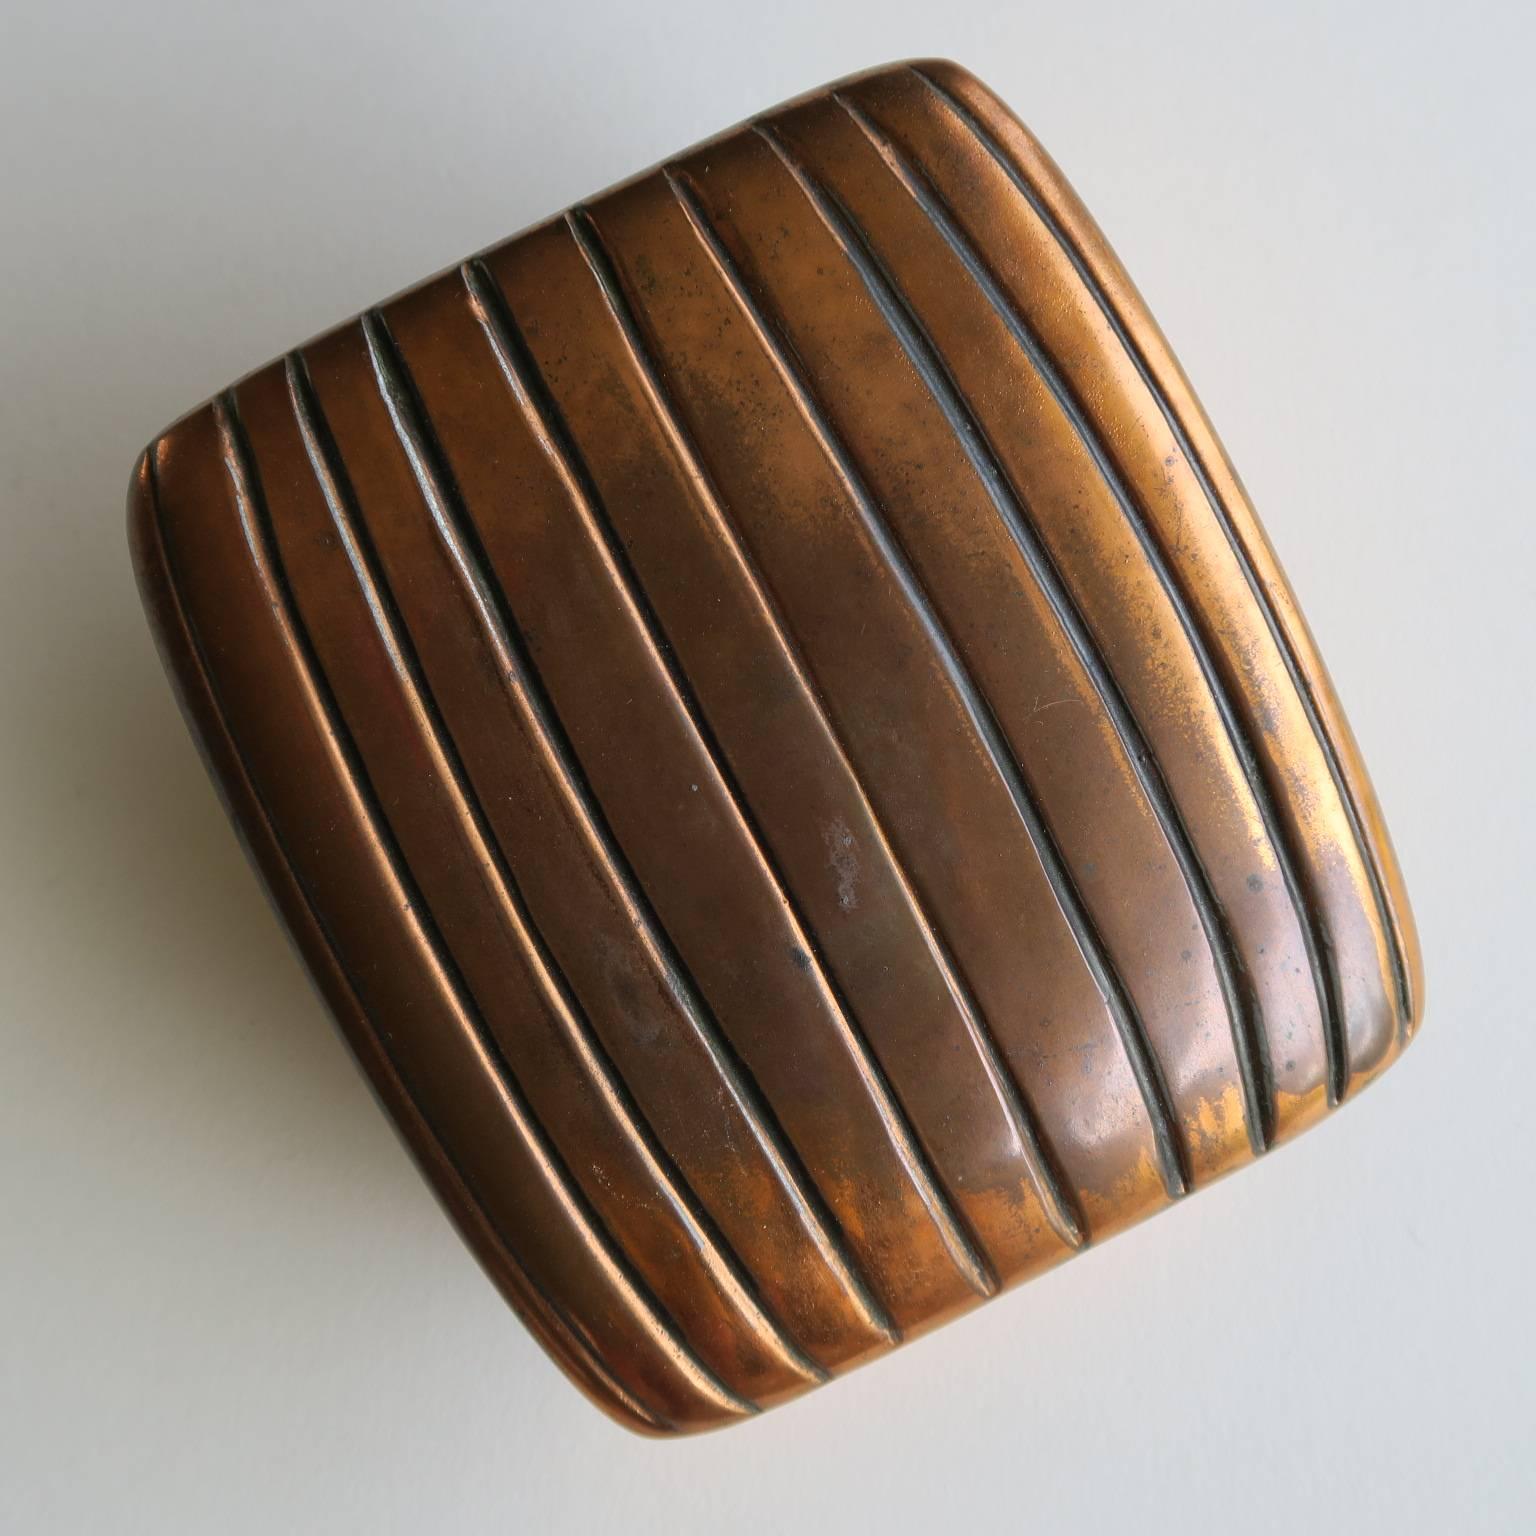 Vintage Decorative Copper-Plated Metal Box in Rectangular Form with Lines Design For Sale 1